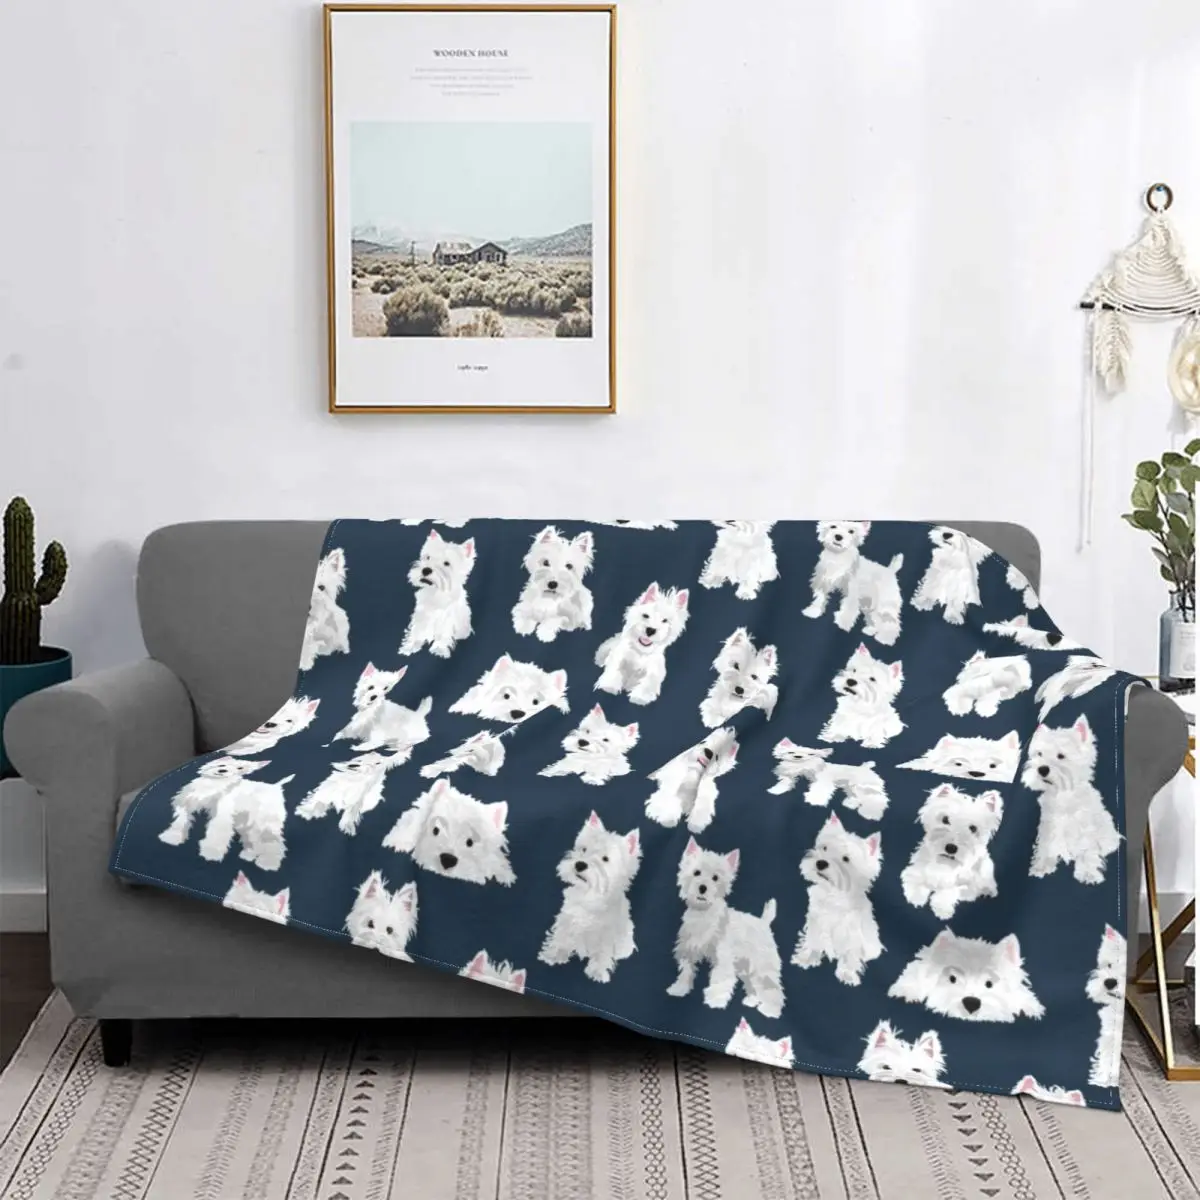 

Tartan And Polka Dots Blankets Soft Flannel West Highland White Terrier Dog Cartoon Westie Throw Blanket for Couch Home Bedroom